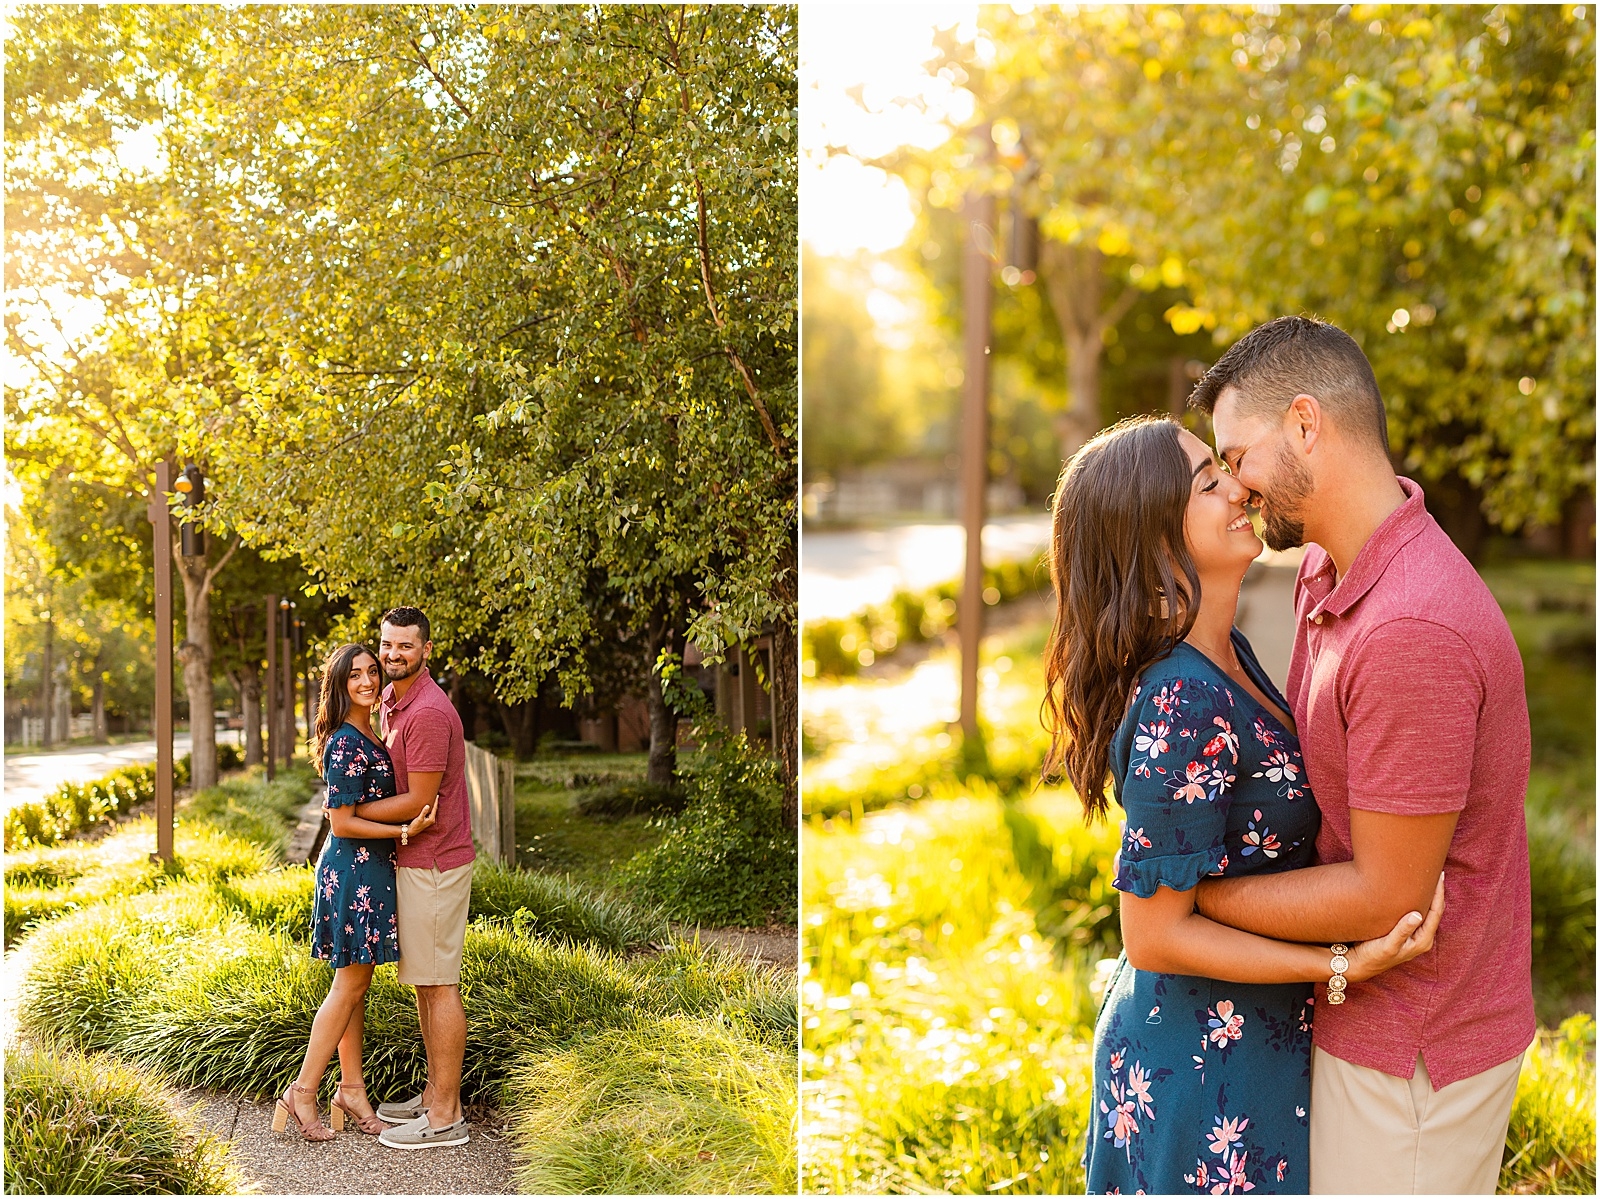 Sally and Andrew's Anniversary Session in New Harmony |Bret and Brandie Photography0001.jpg